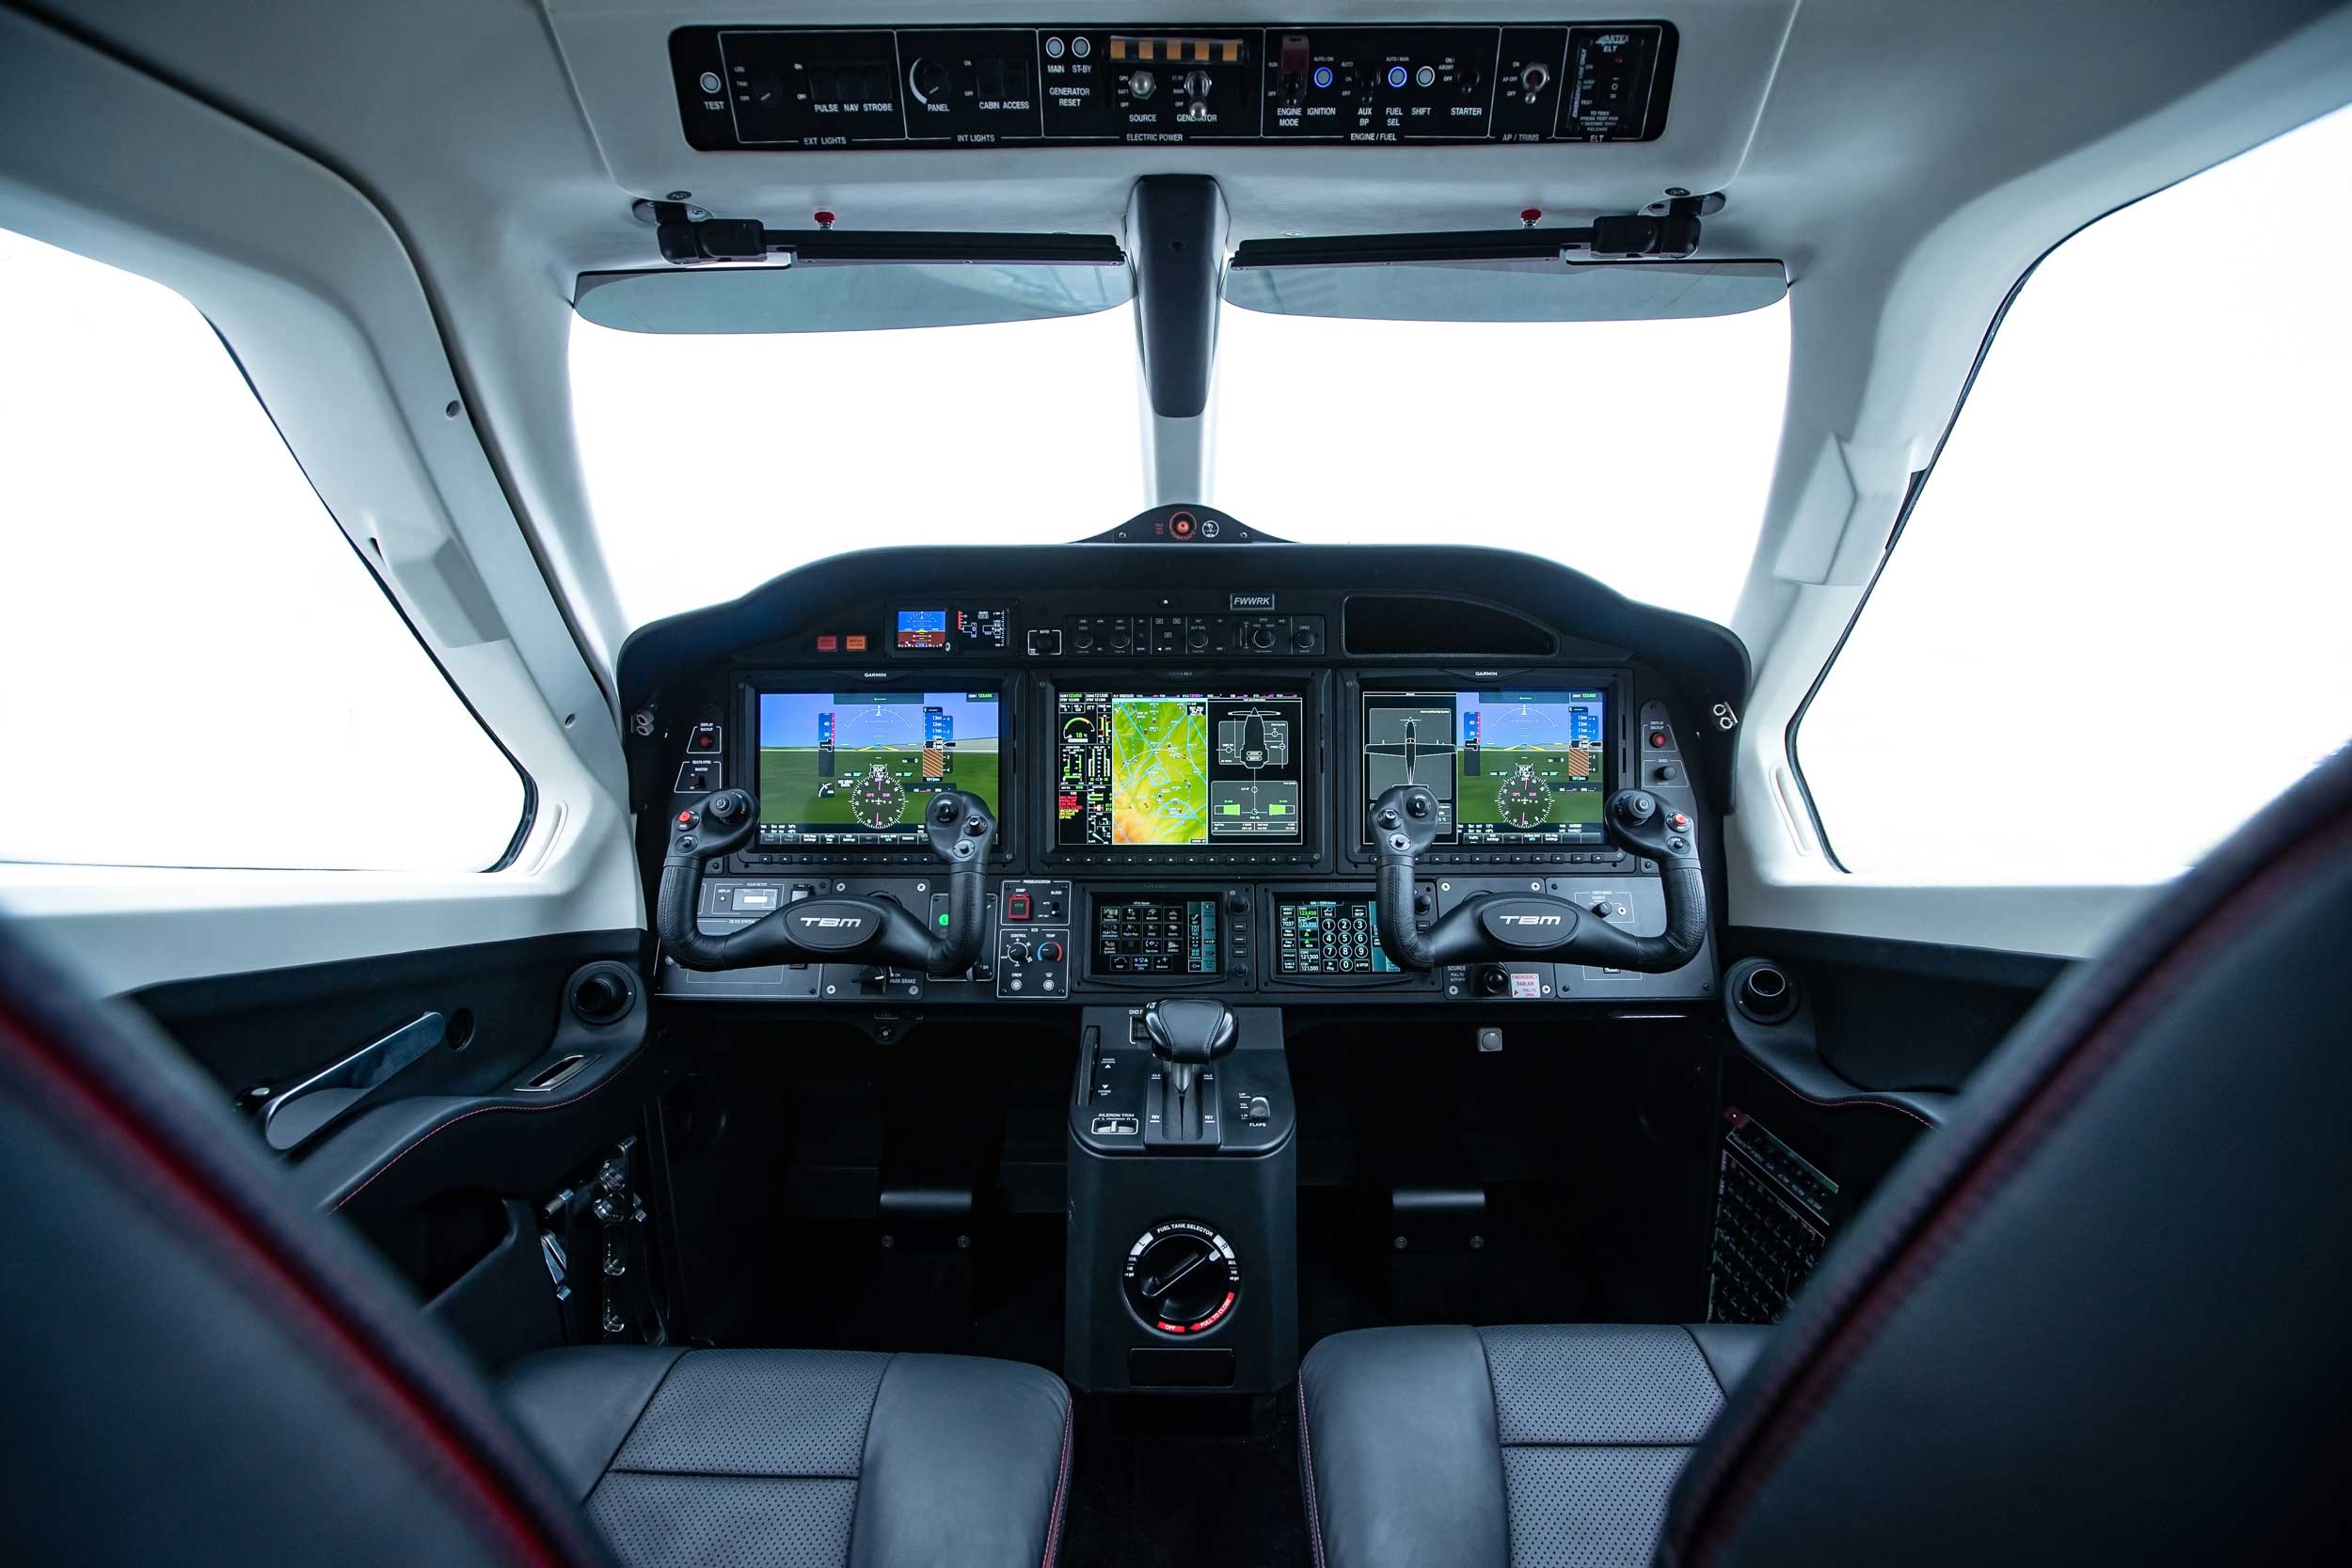 Won the lottery? You'll need around $5m for a top of the range TBM 960 like this